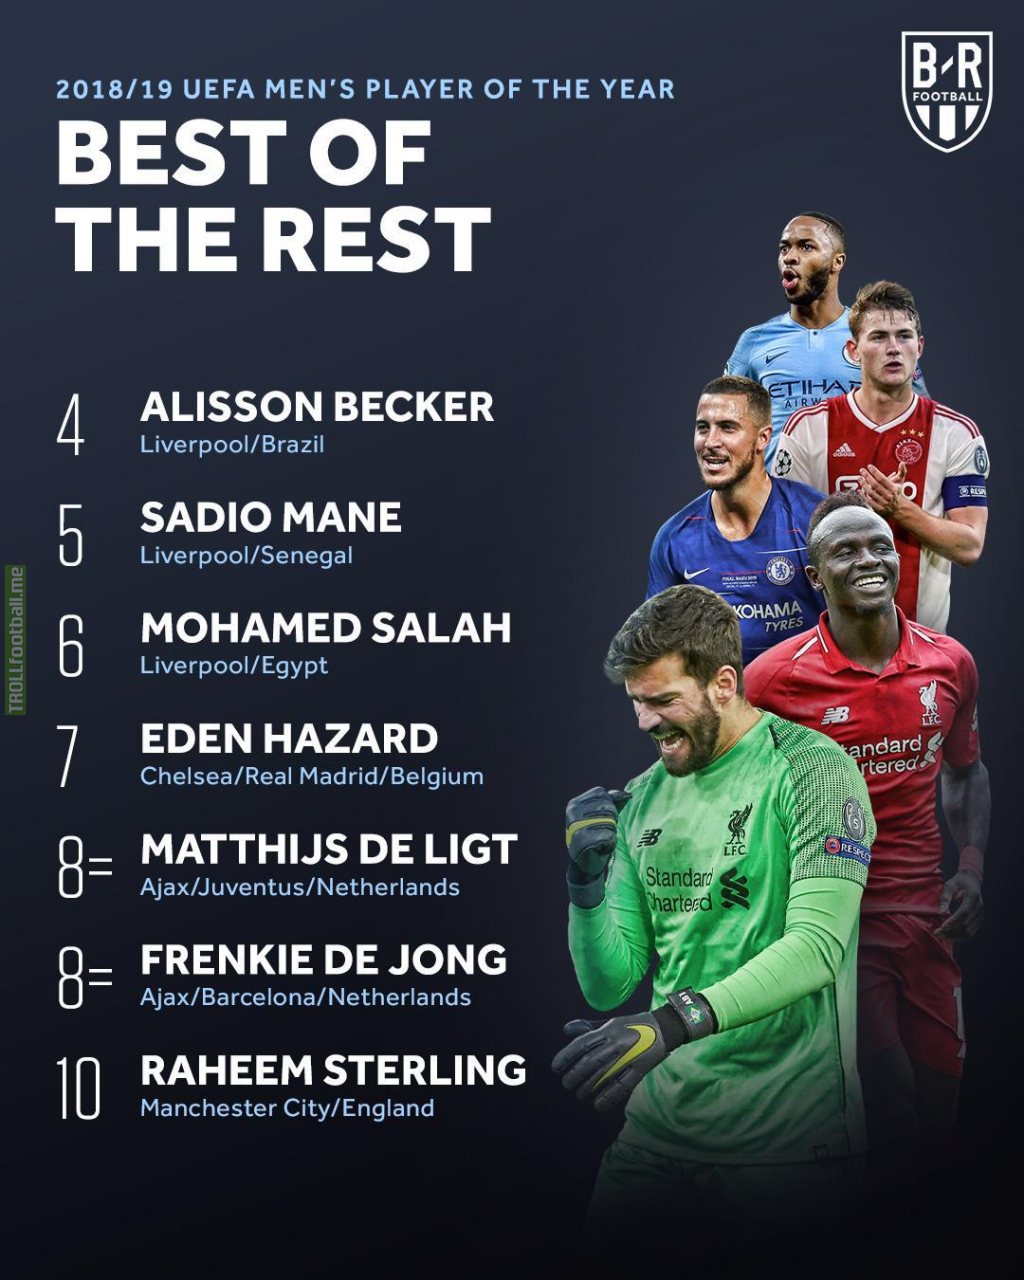 The rest of the top 10 for Fifa’s “The Best” award: 4th Alisson, 5th Mane, 6th Salah, 7th Hazard, 8th de Ligt and de Jong, 10th Sterling